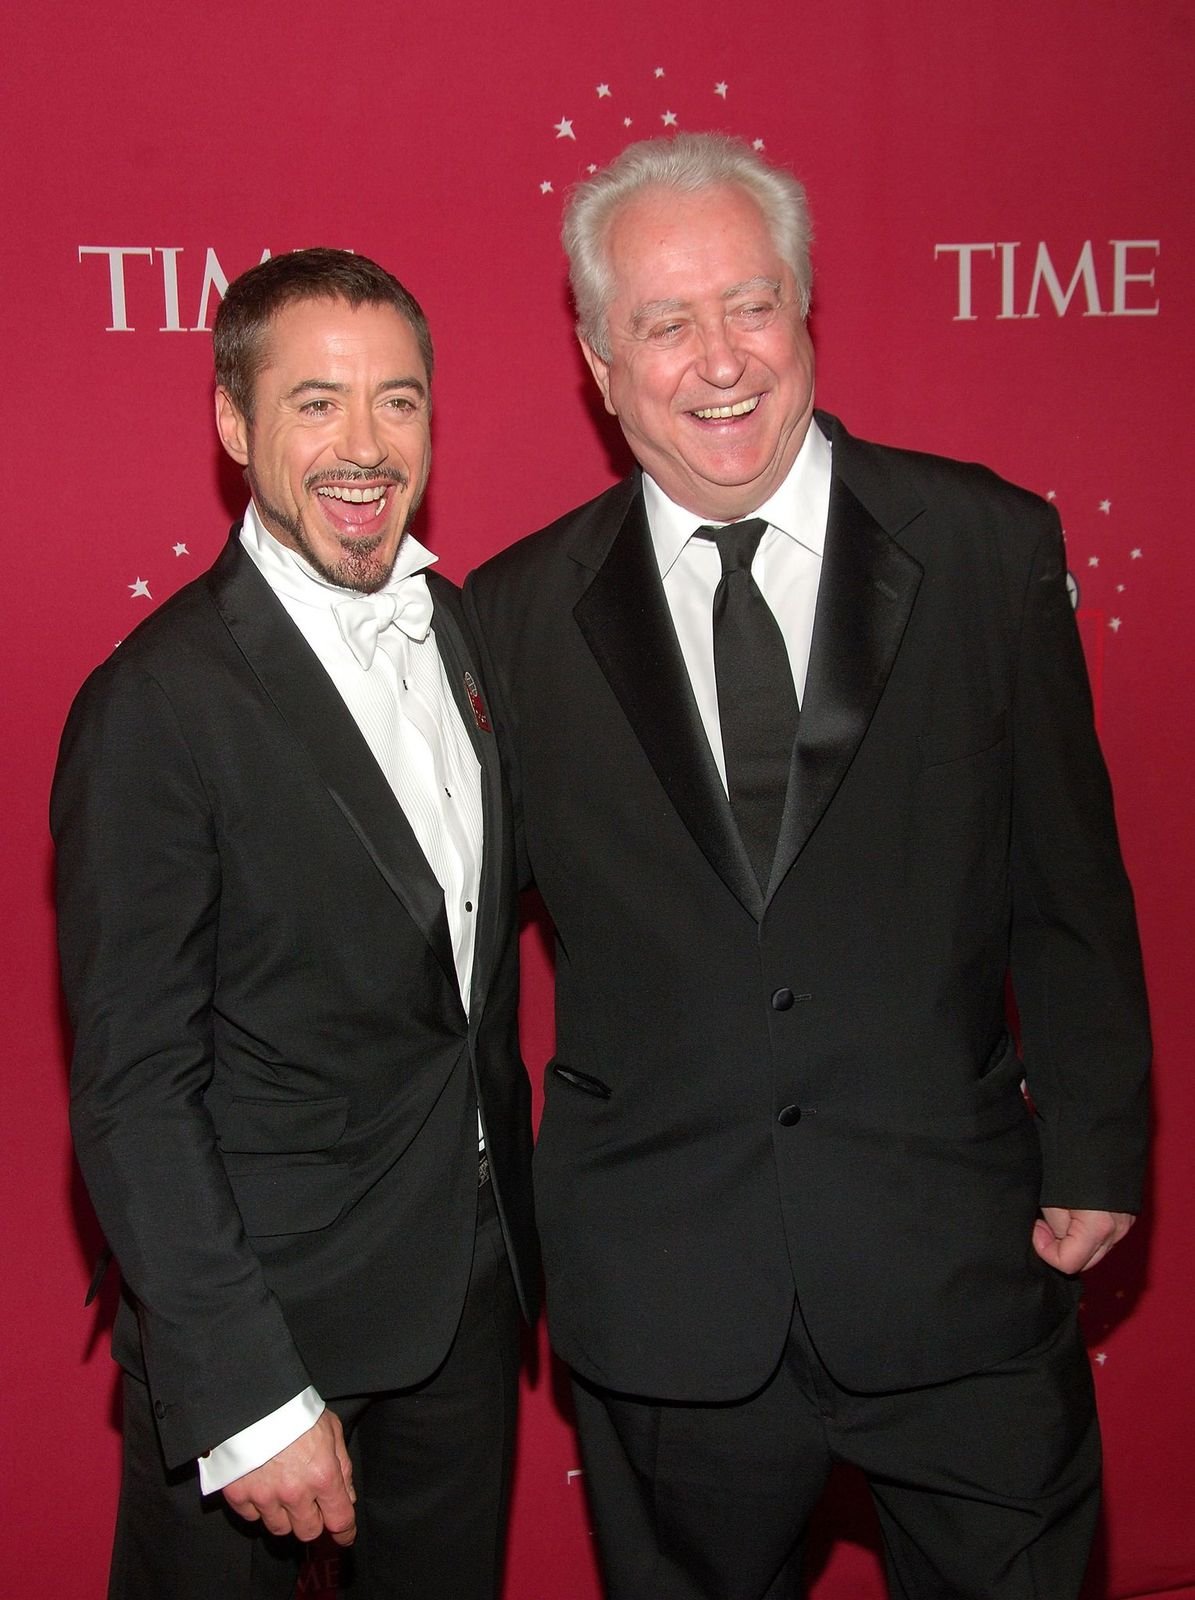 Robert Downey Jr. and Robert Downey Sr. at Time's "100 Most Influential People In The World" Gala at Jazz at Lincoln Center in New York City on May 8, 2008. | Photo: Getty Images